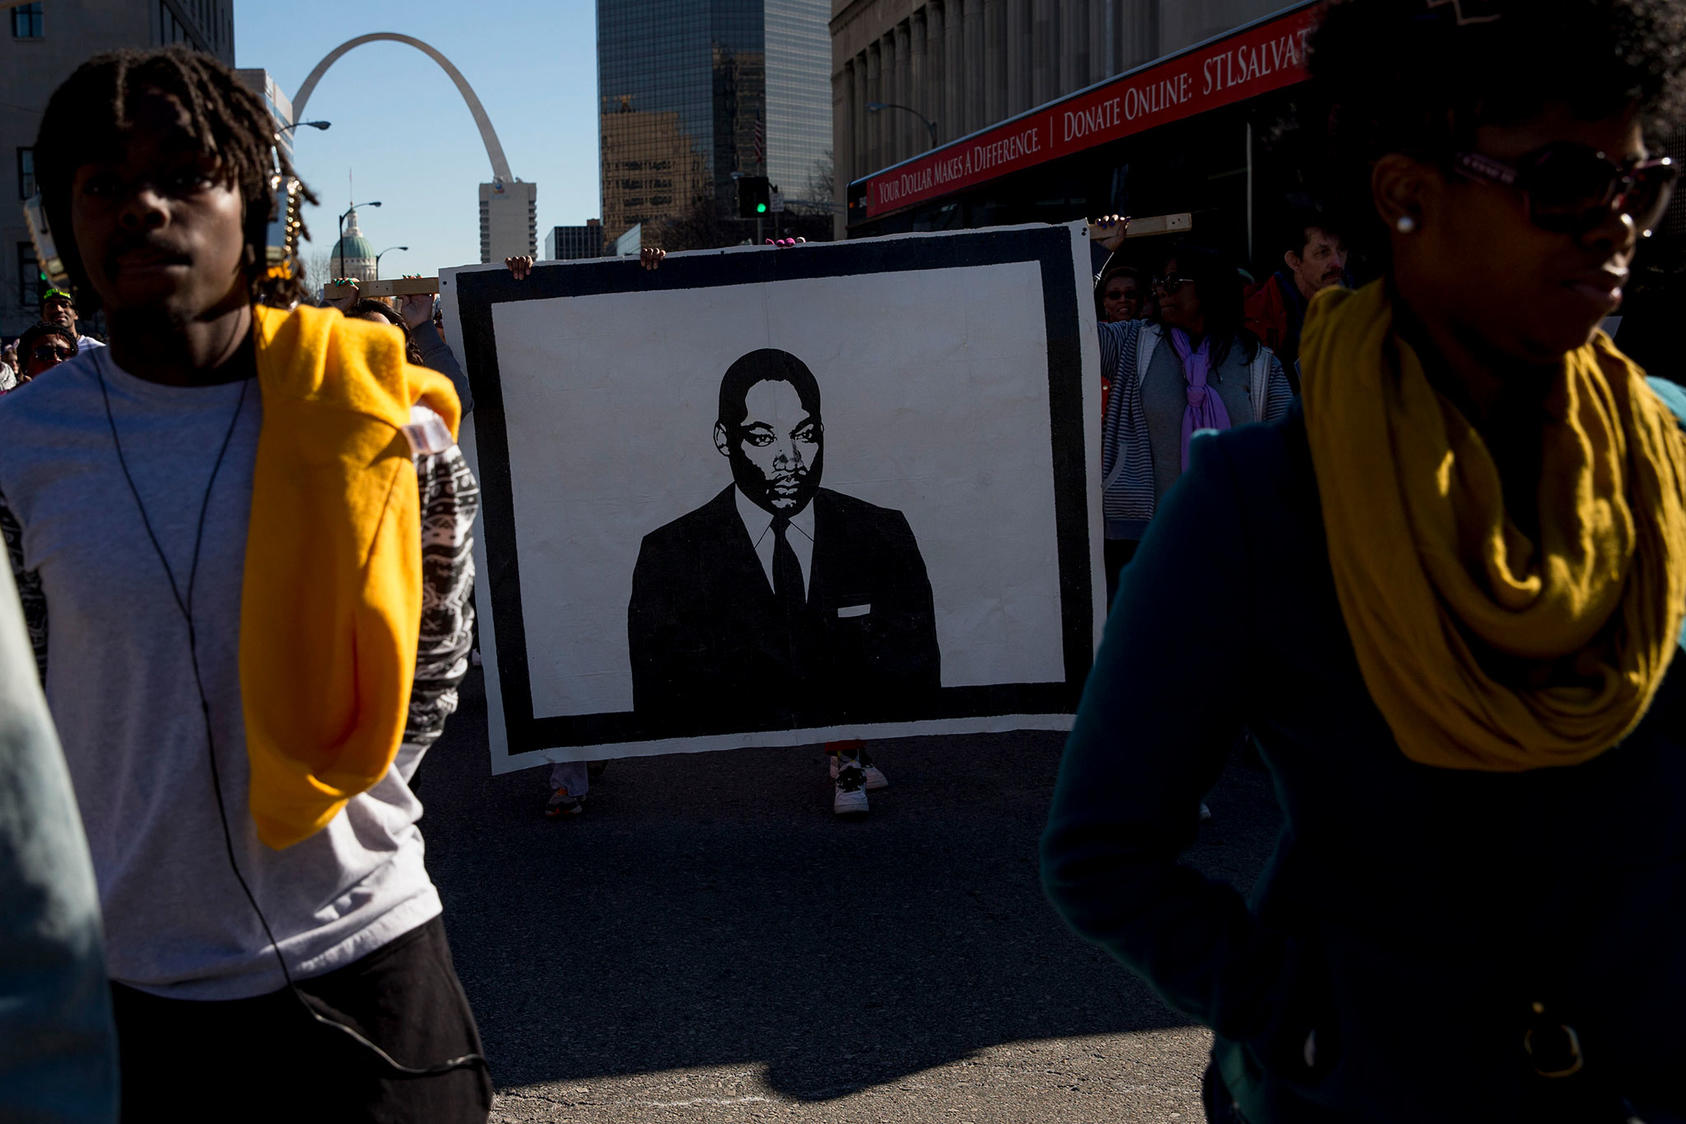 A portrait of Martin Luther King Jr. is carried during a march on the holiday named for him in St. Louis, Missouri, Jan. 19, 2015. (Whitney Curtis/The New York Times)